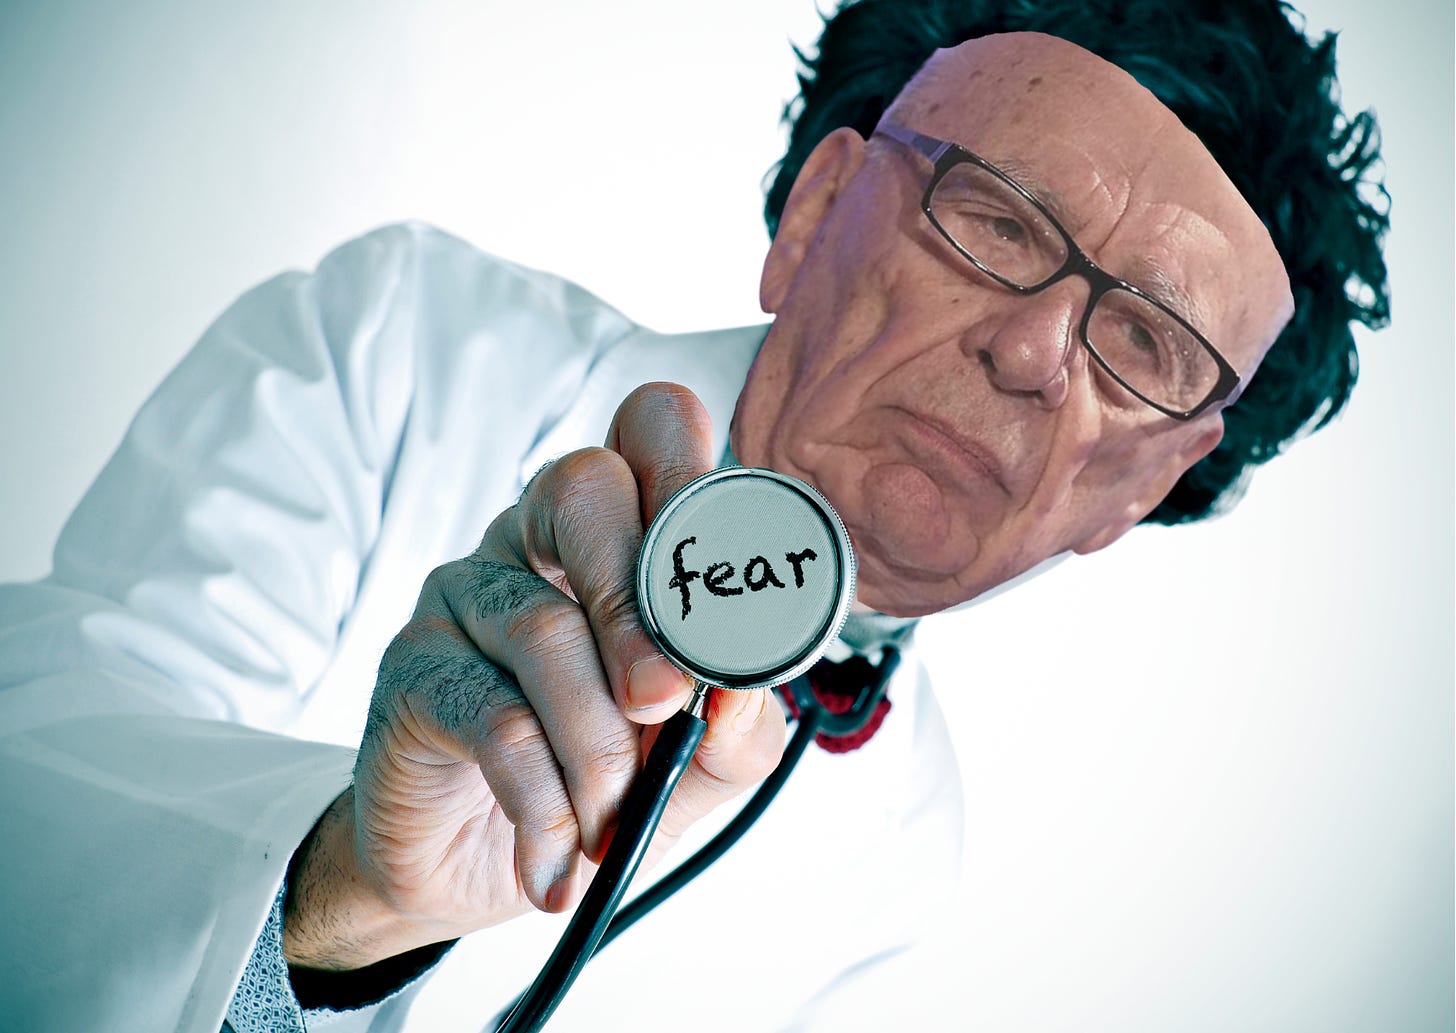 Rupert Murdoch but he's s doctor and his stethoscope says "fear"